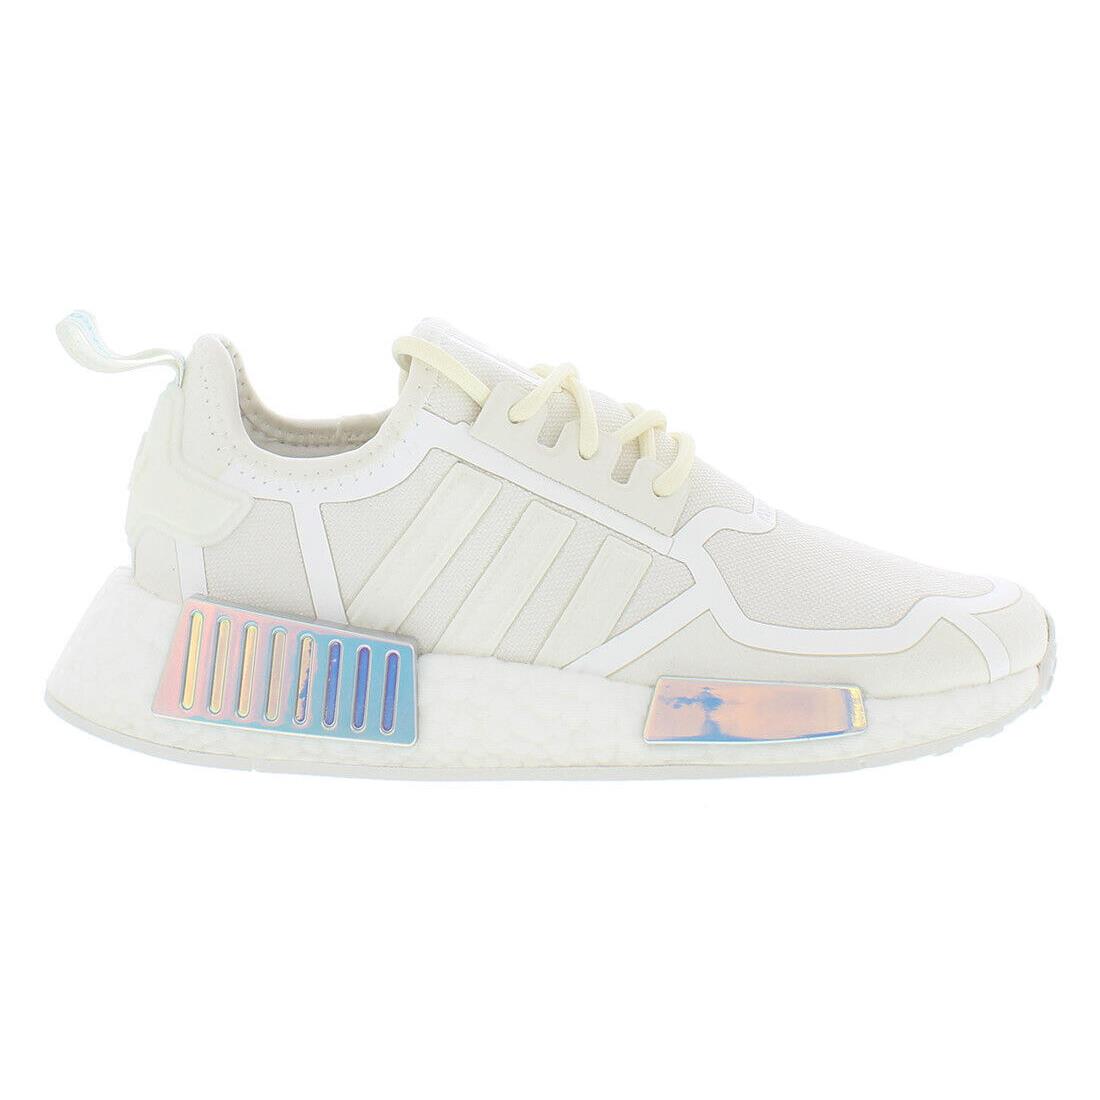 Adidas Nmd R1 GS Girls Shoes